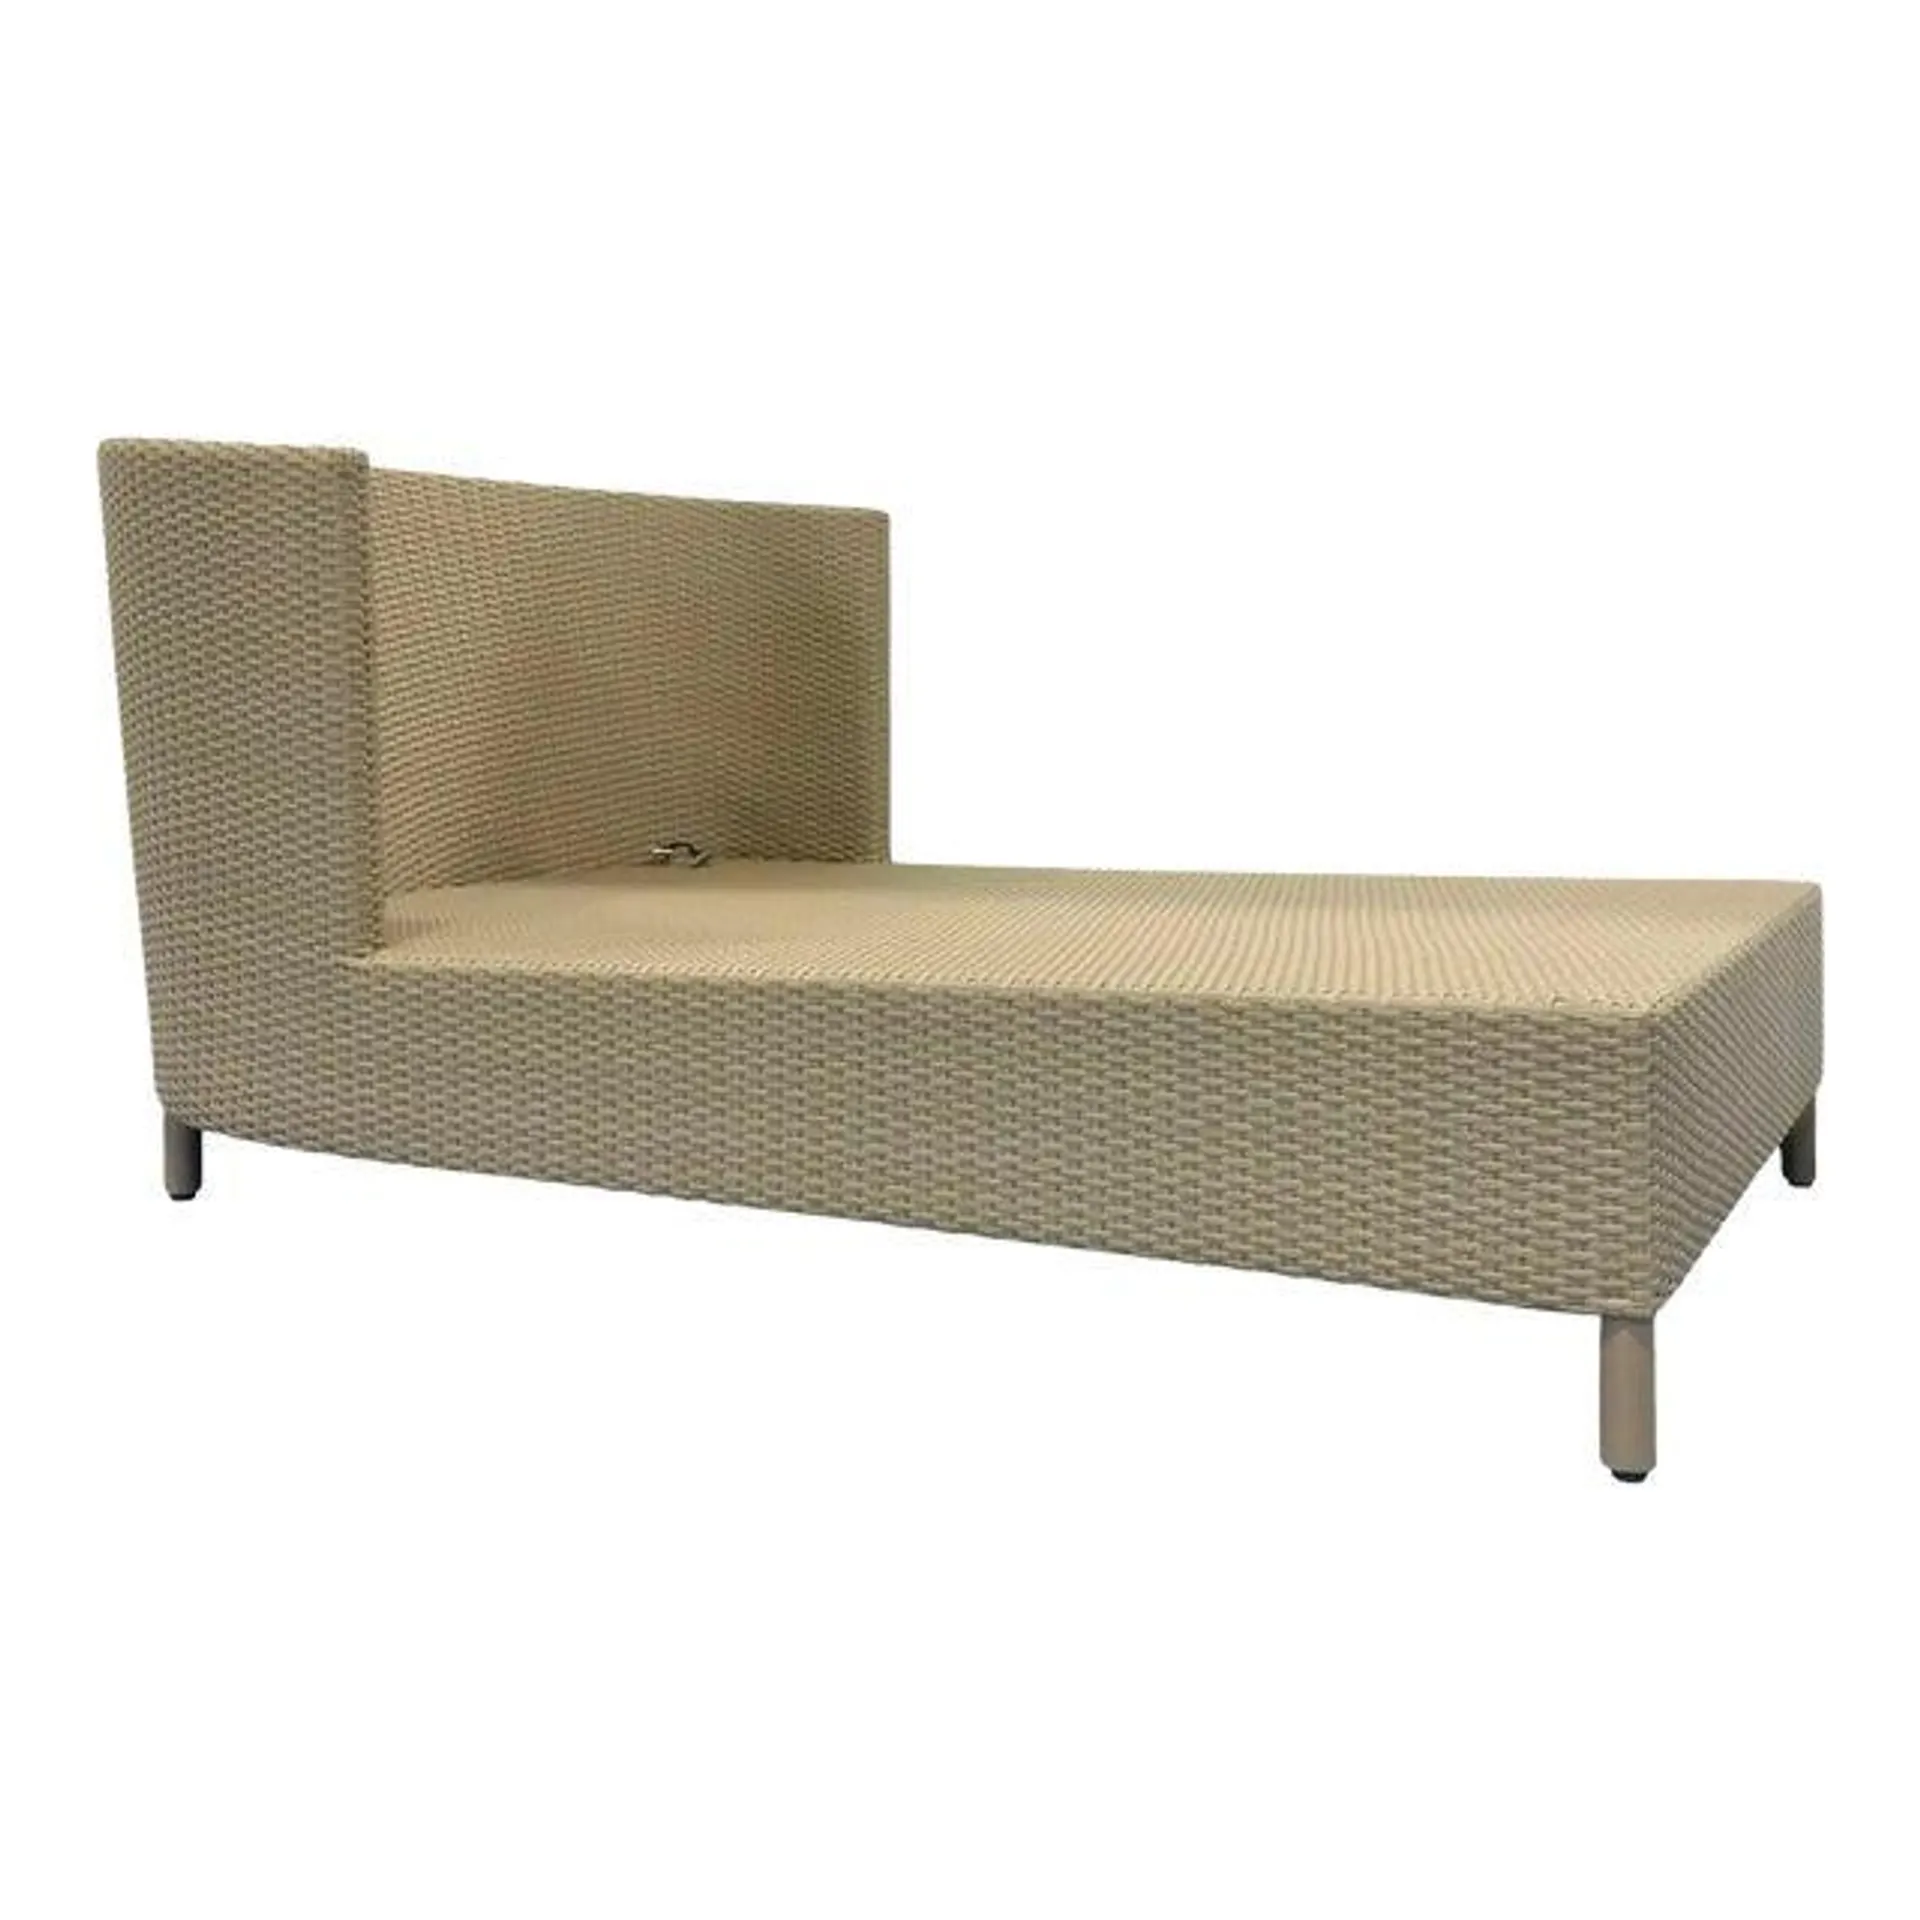 Barbara Barry for Baker / McGuire Gray Woven Resin Outdoor Chaise